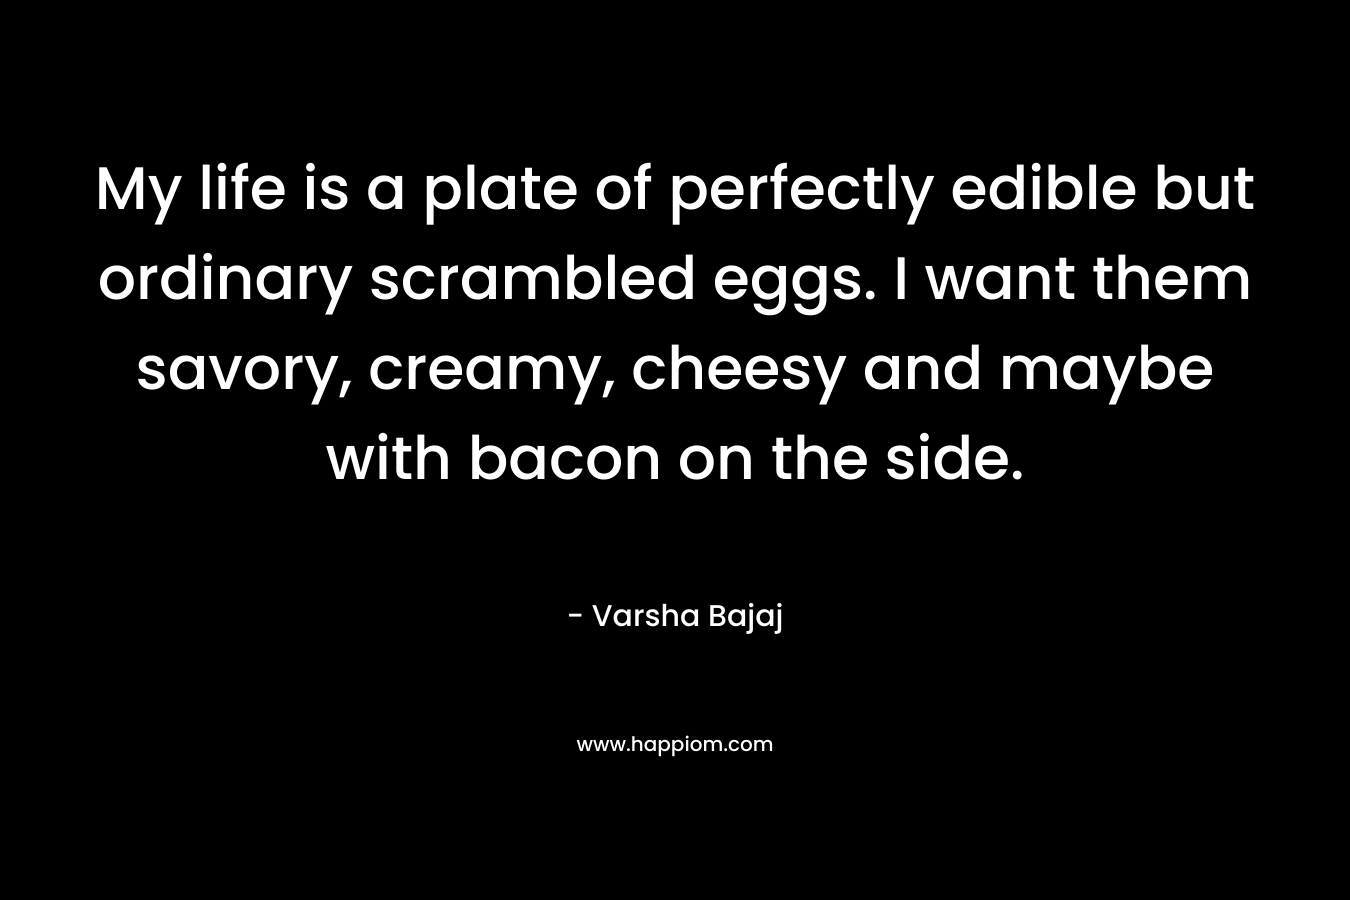 My life is a plate of perfectly edible but ordinary scrambled eggs. I want them savory, creamy, cheesy and maybe with bacon on the side.